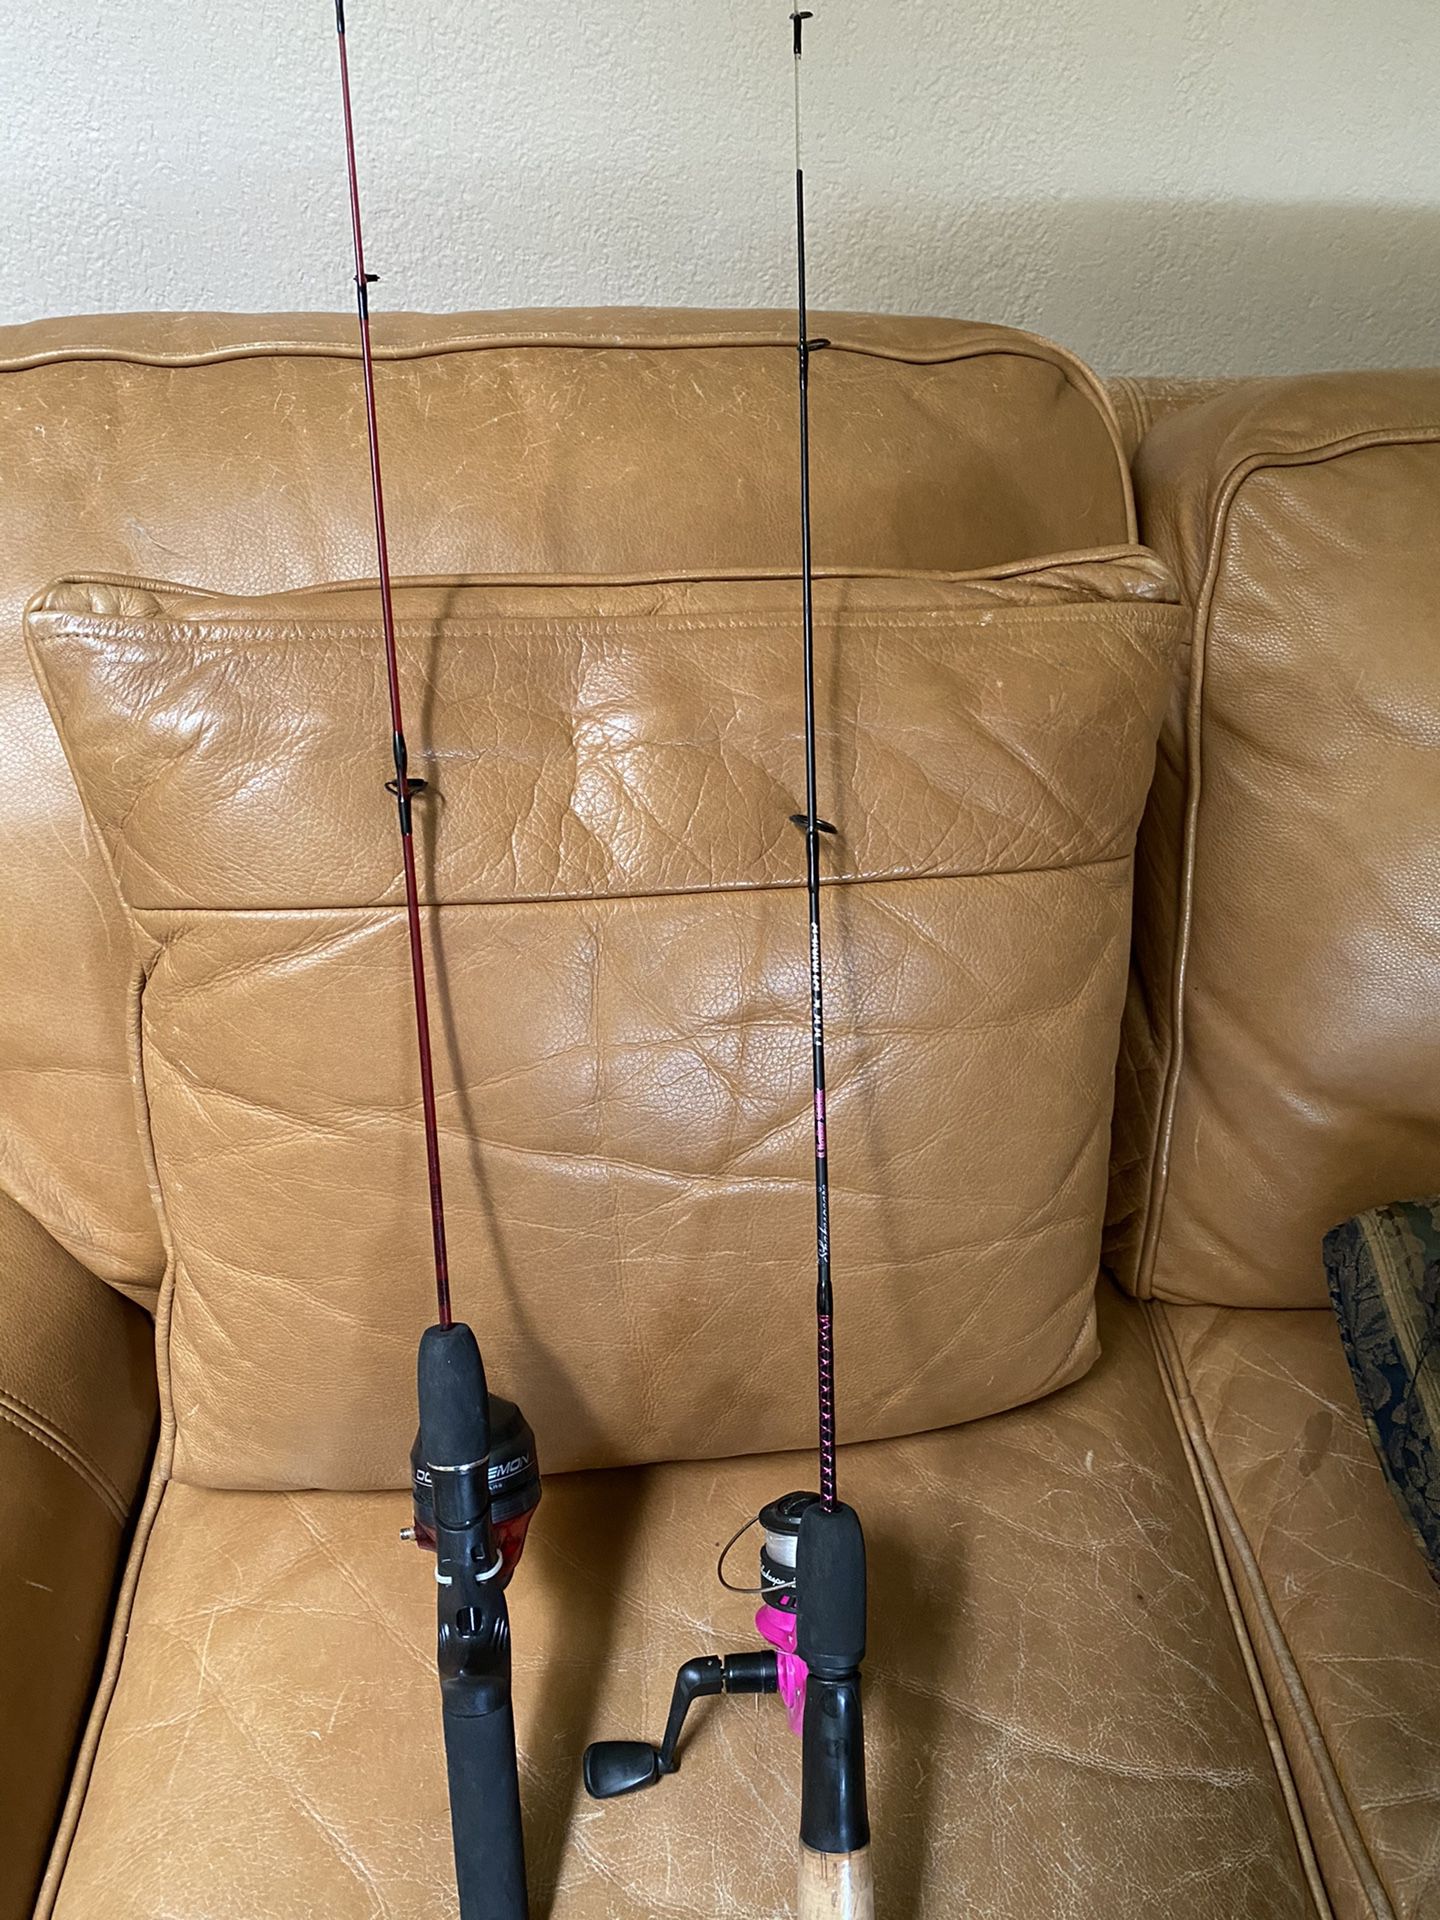 2 children’s fishing poles - one handle is missing off the reel both $10